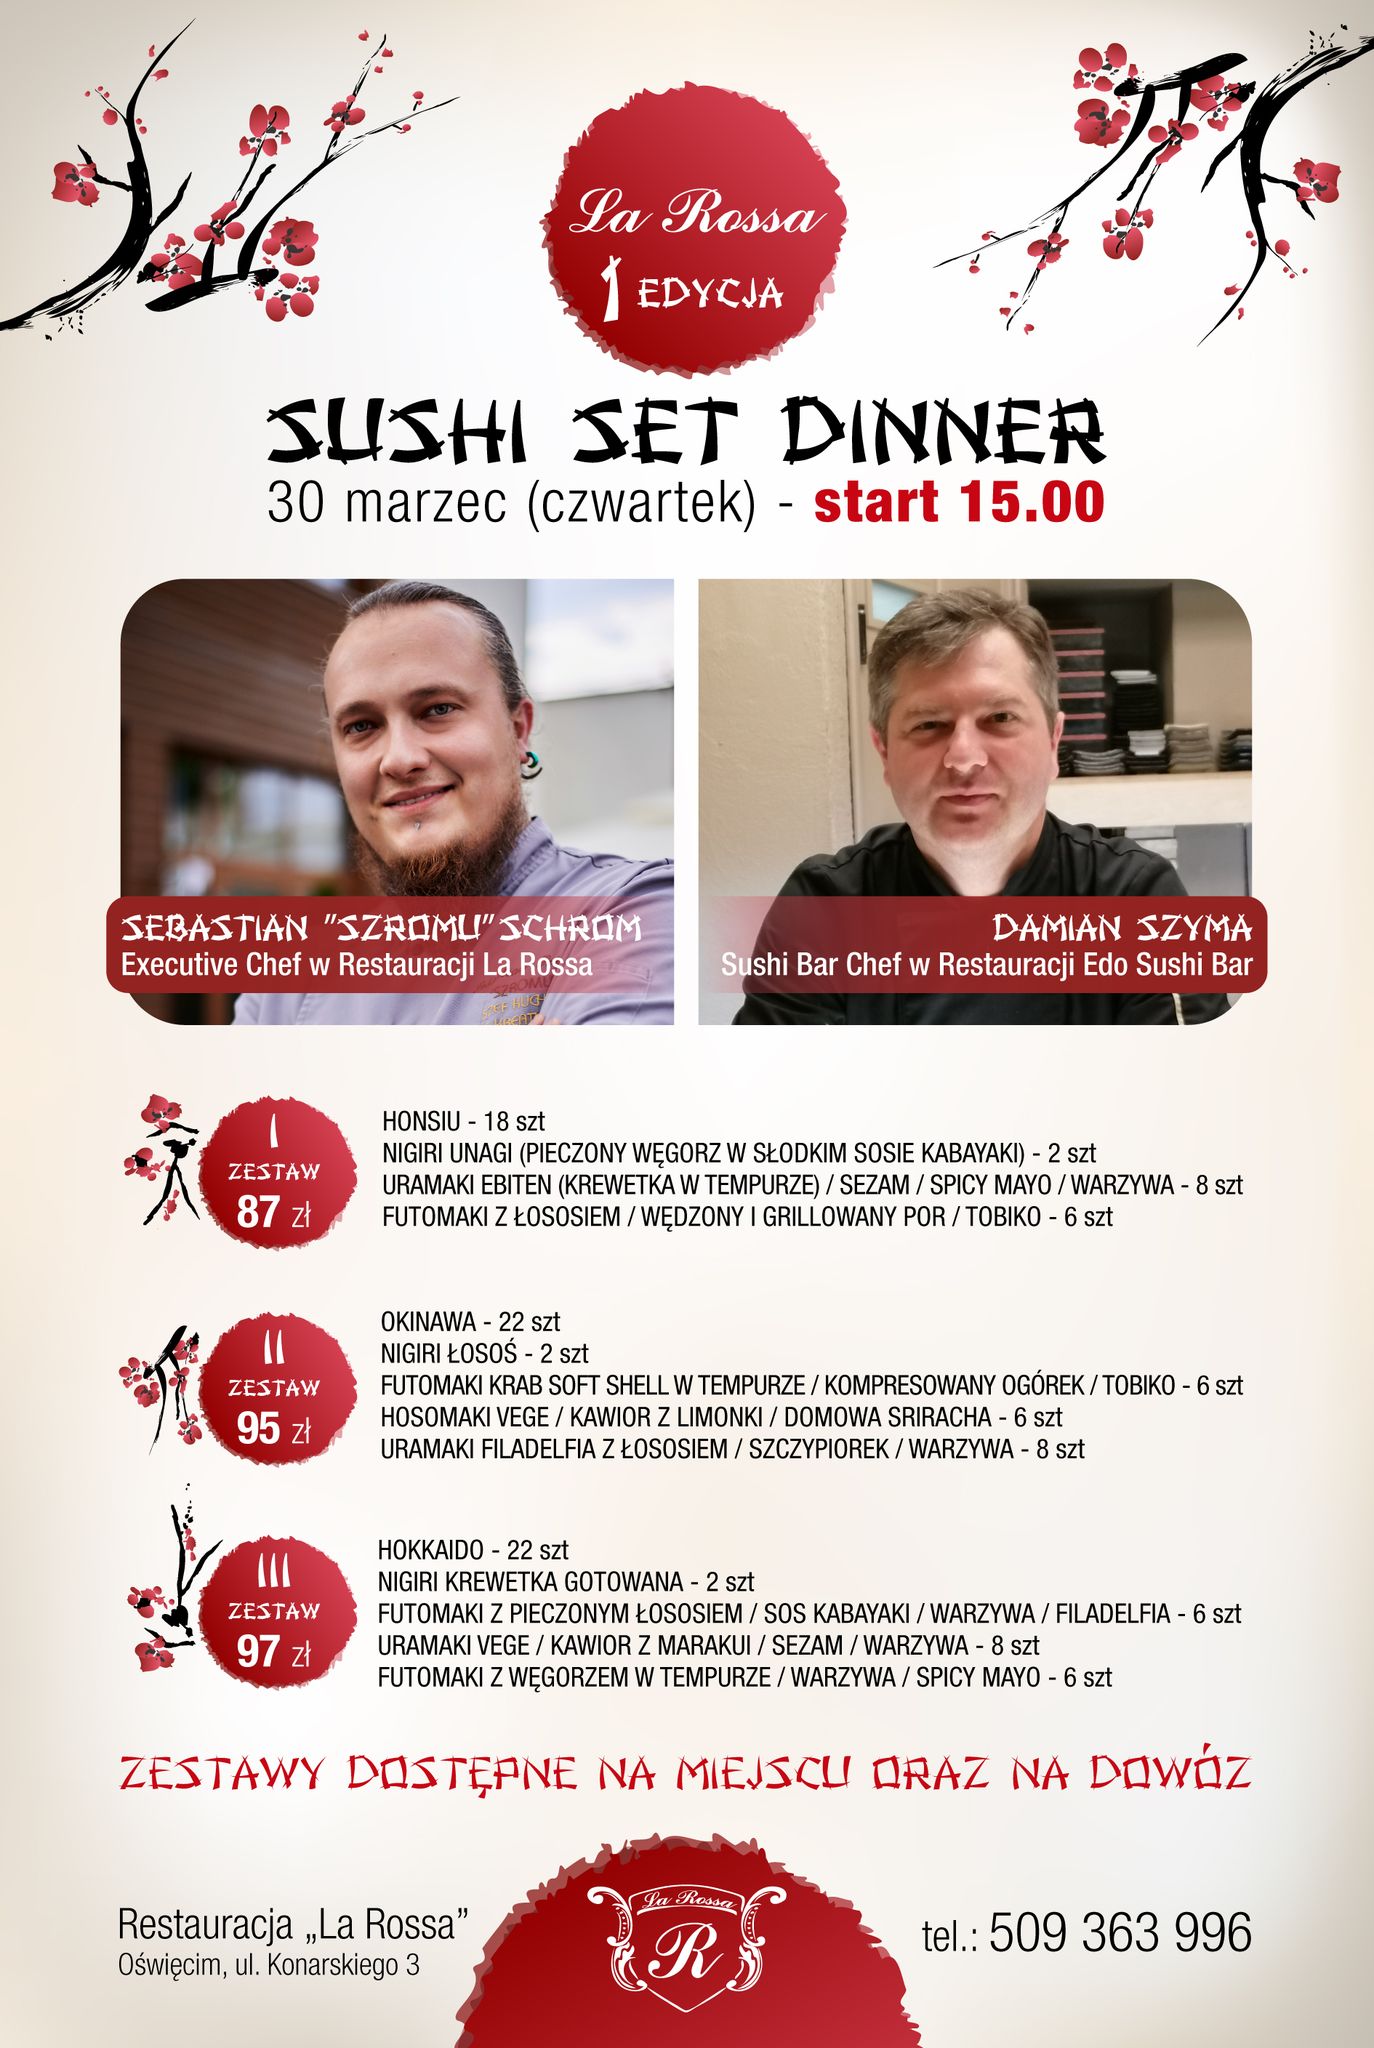 SUSHI SET DINNER 1 EDITION - MARCH 30, 2023